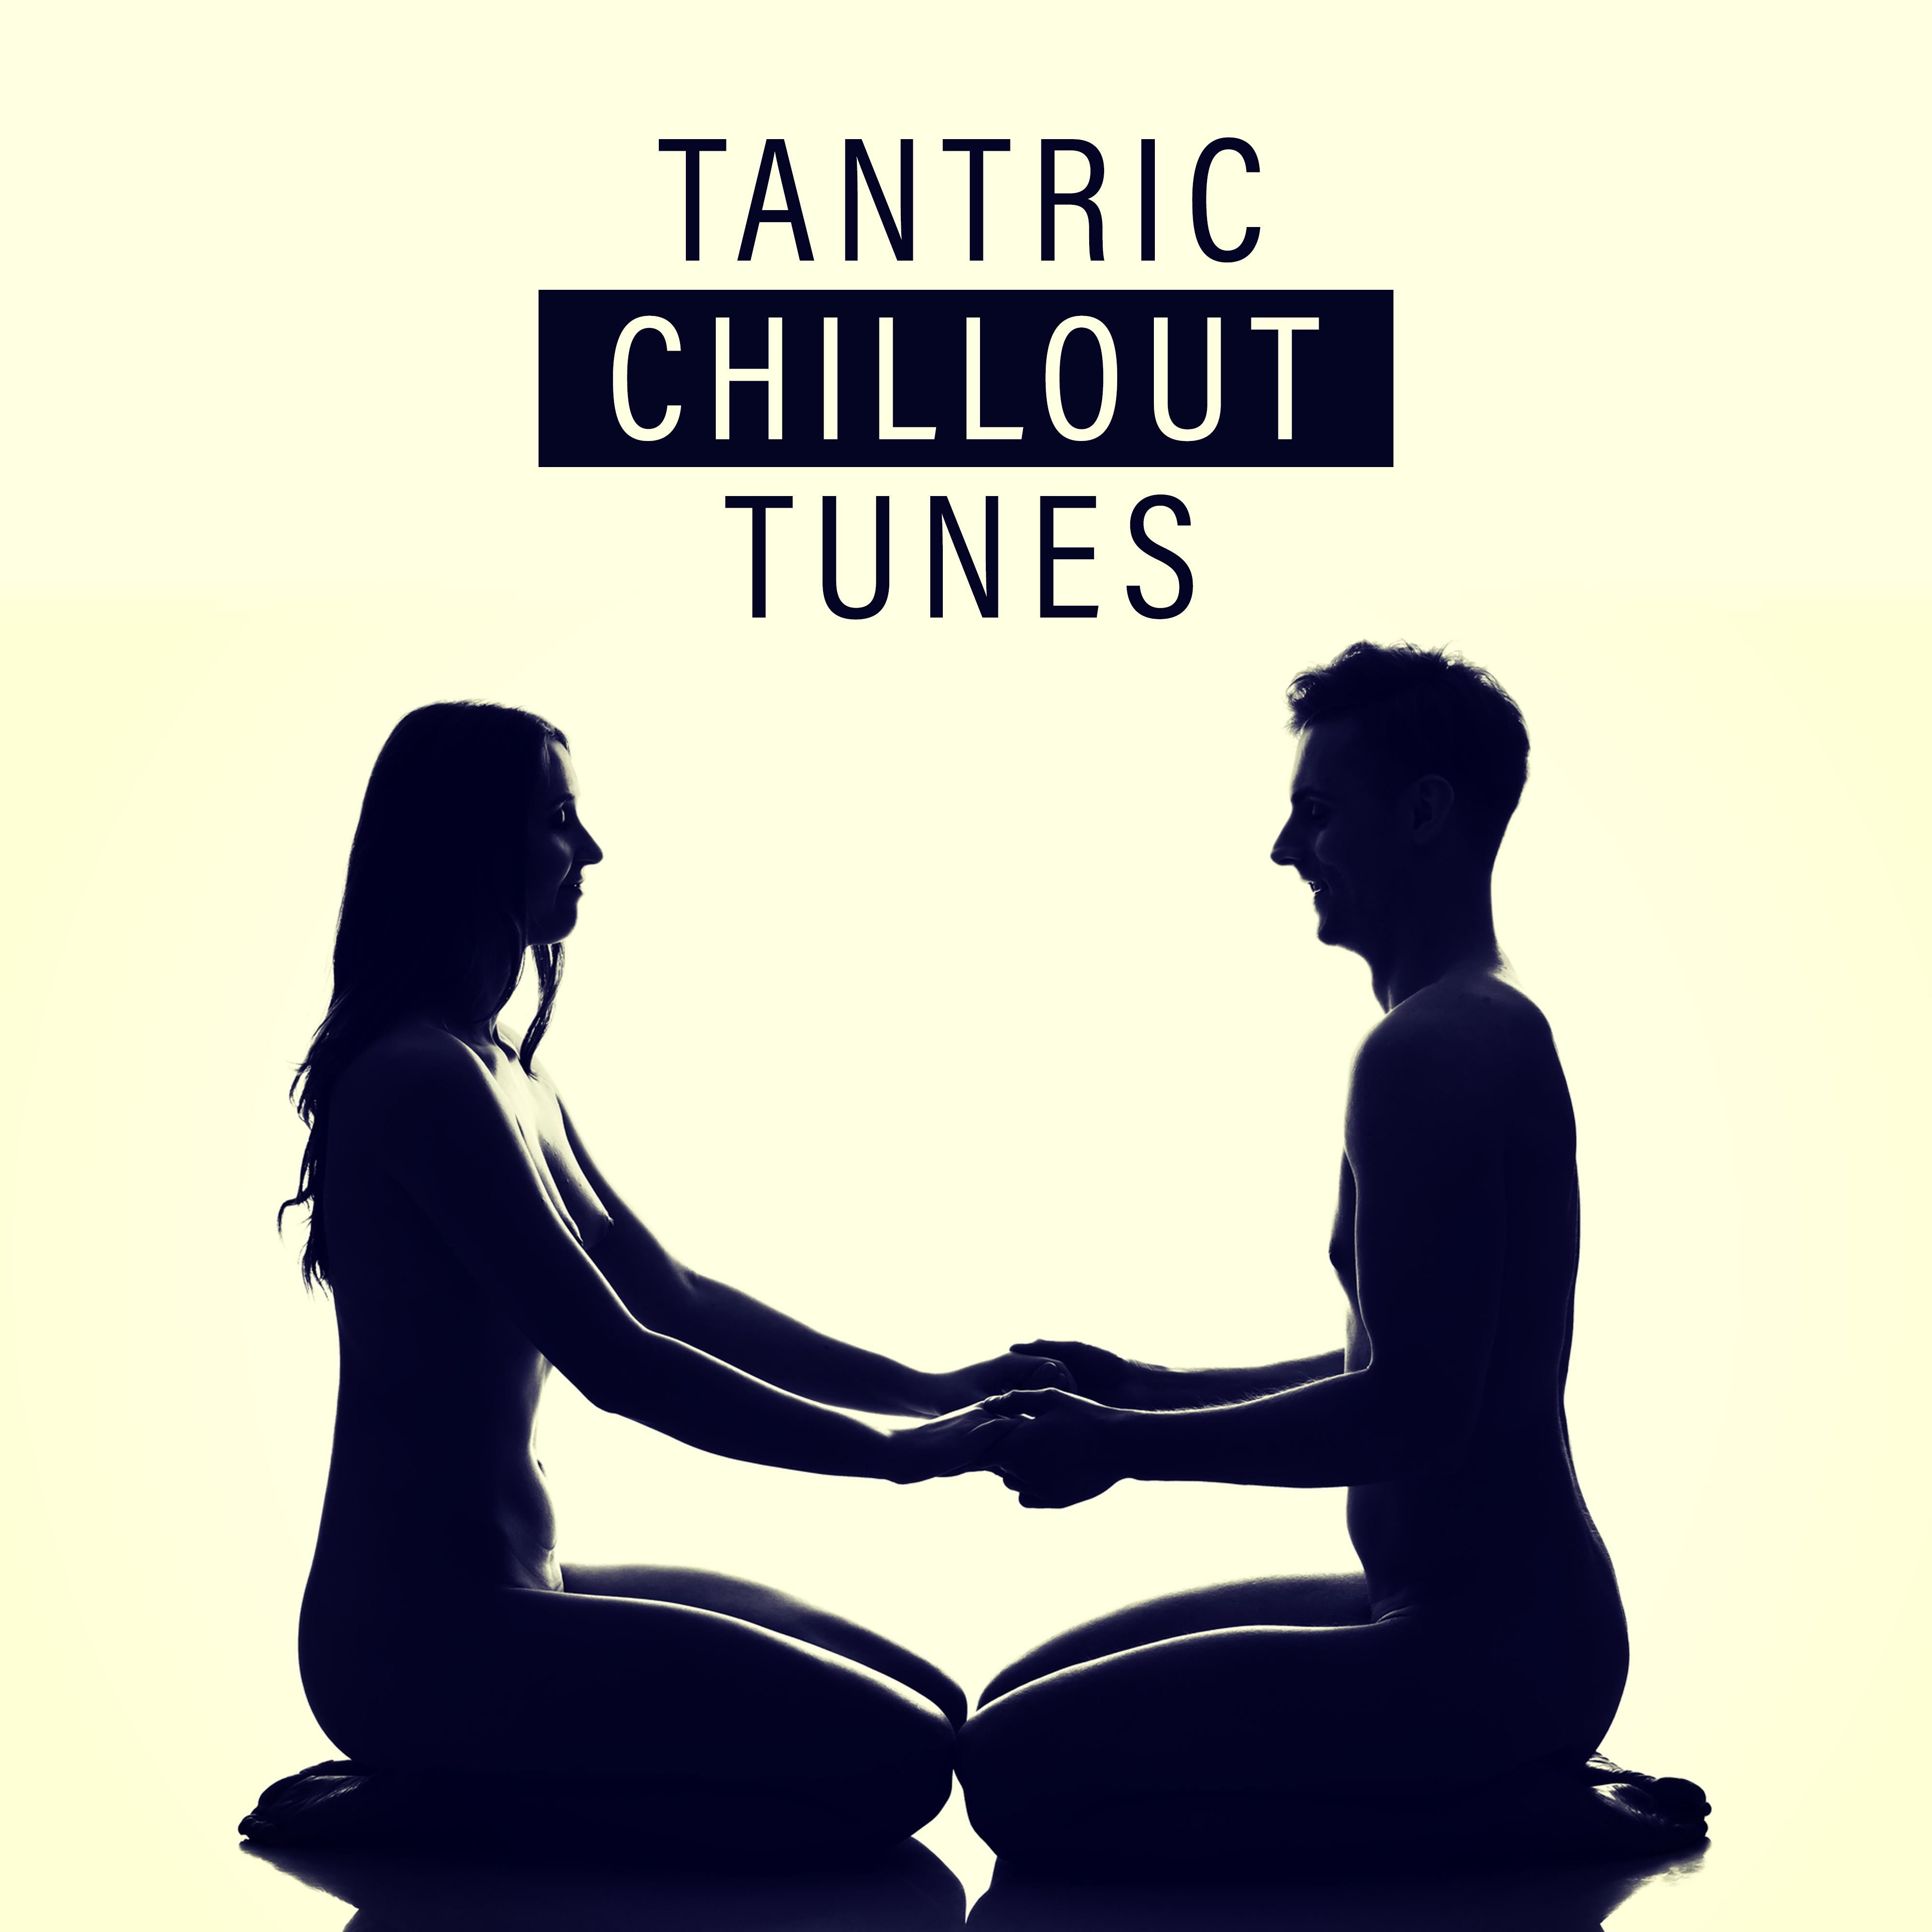 Tantric Chillout Tunes – Sensual Music for ***, Chillout 2019, Yoga Chill, Erotic Massage, Zen, Tantric ***, **** Vibes